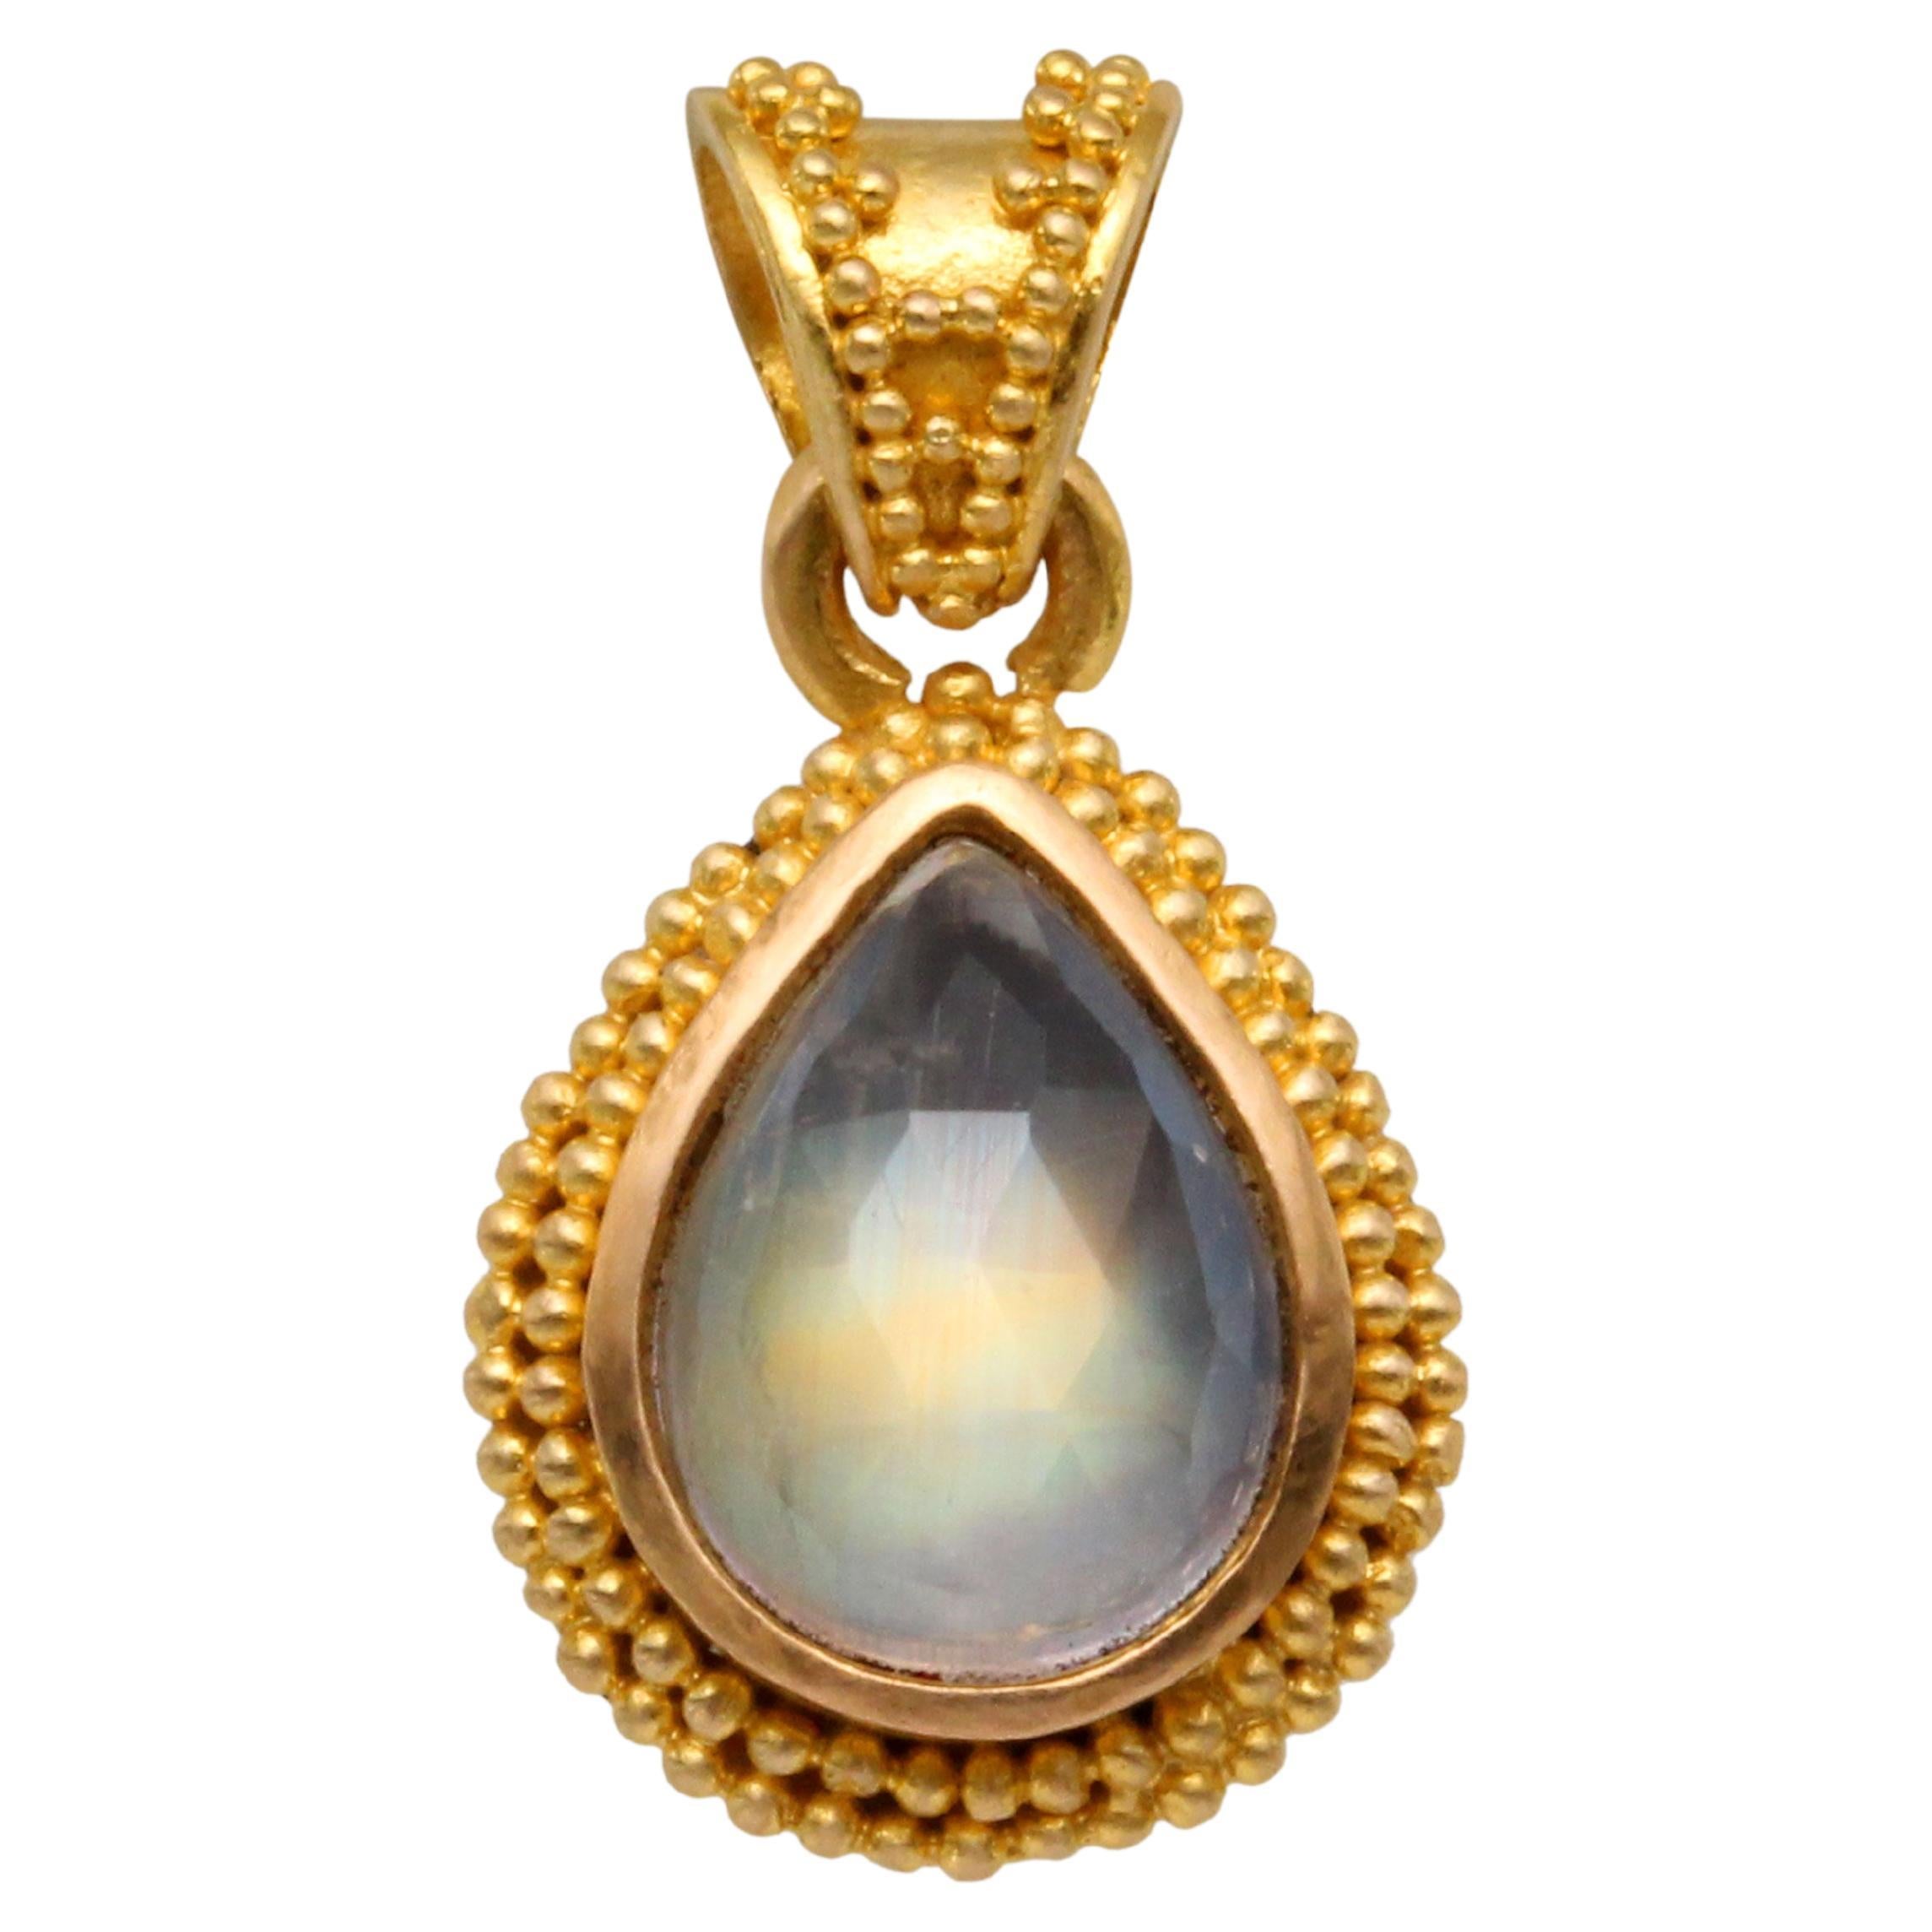 2.0 Carat Faceted Rainbow Moonstone 22k Granulated Gold Pendant 